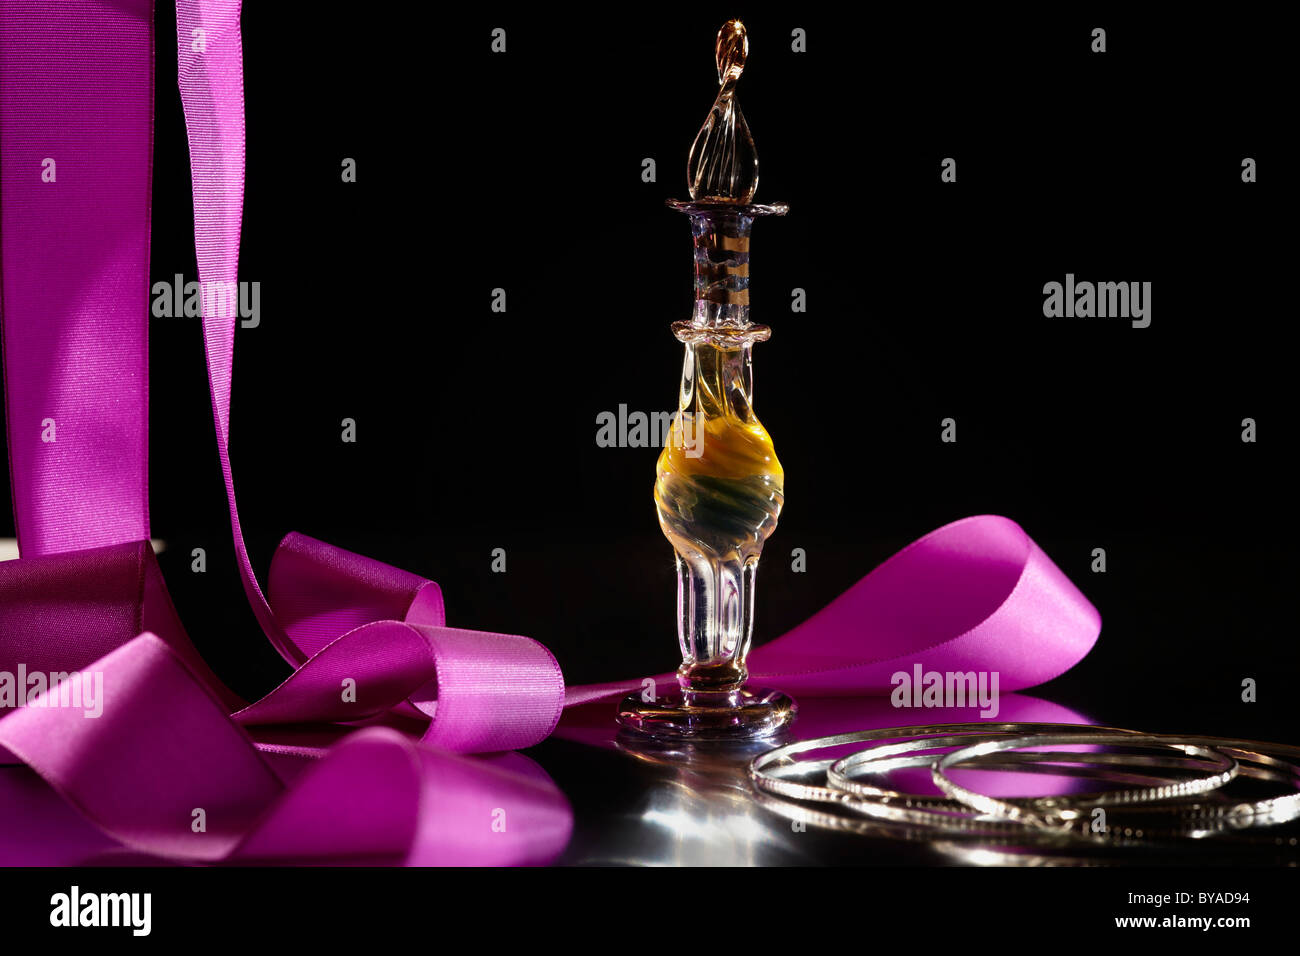 Perfume bottle on a mirrored surface, with bracelets and a pink ribbon Stock Photo